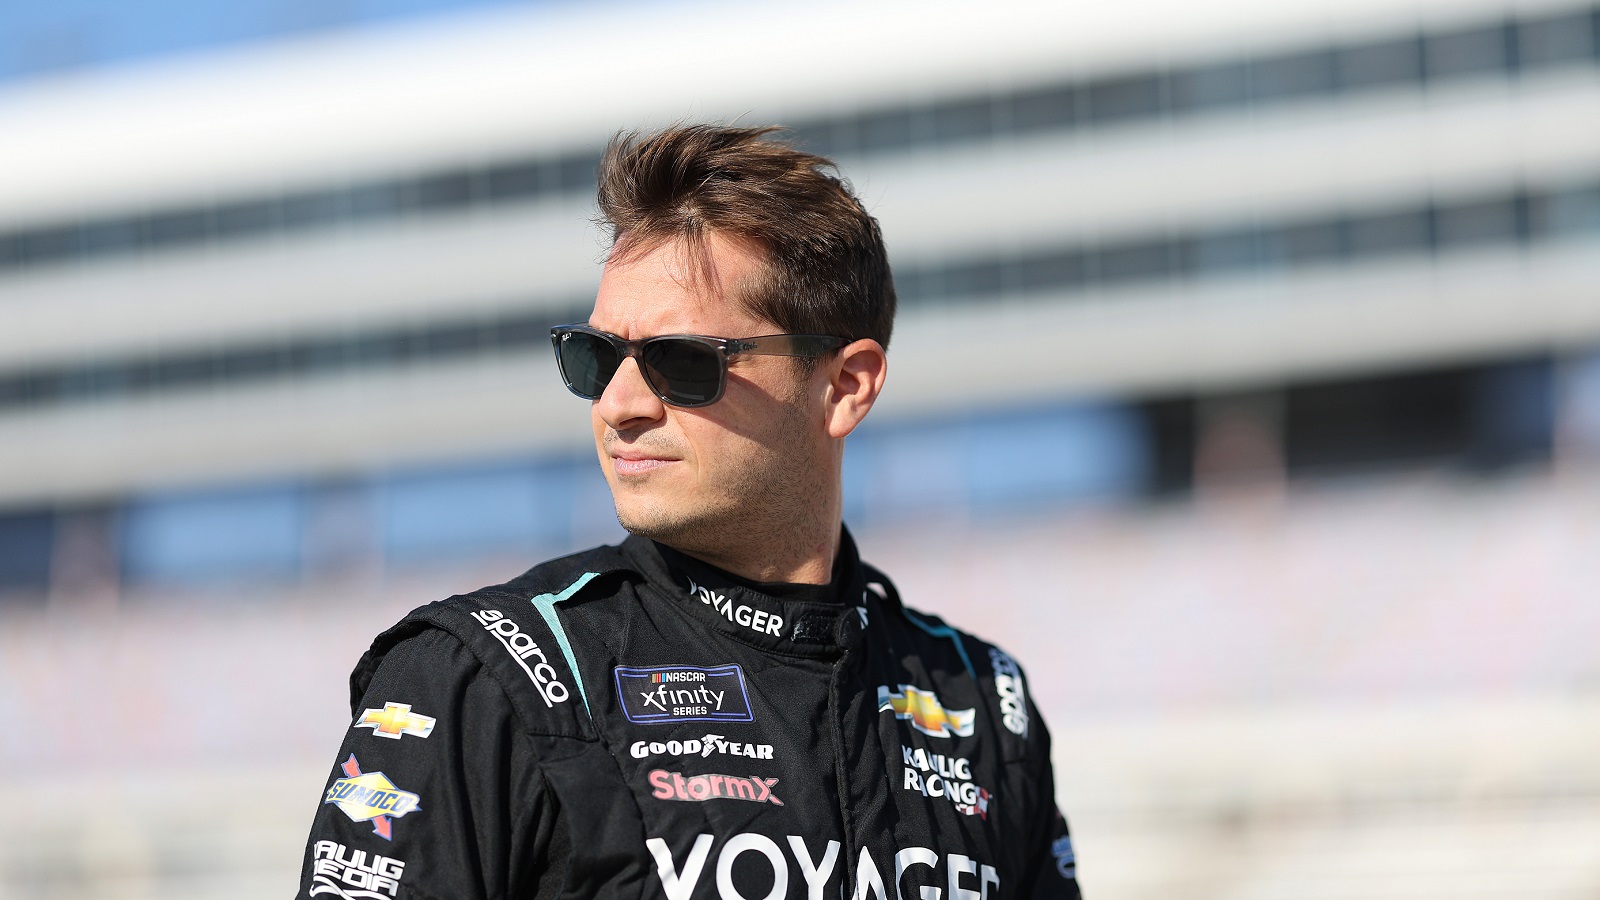 Landon Cassill walks the grid during practice for the NASCAR Xfinity Series Andy's Frozen Custard 300 at Texas Motor Speedway on Sept. 24, 2022.